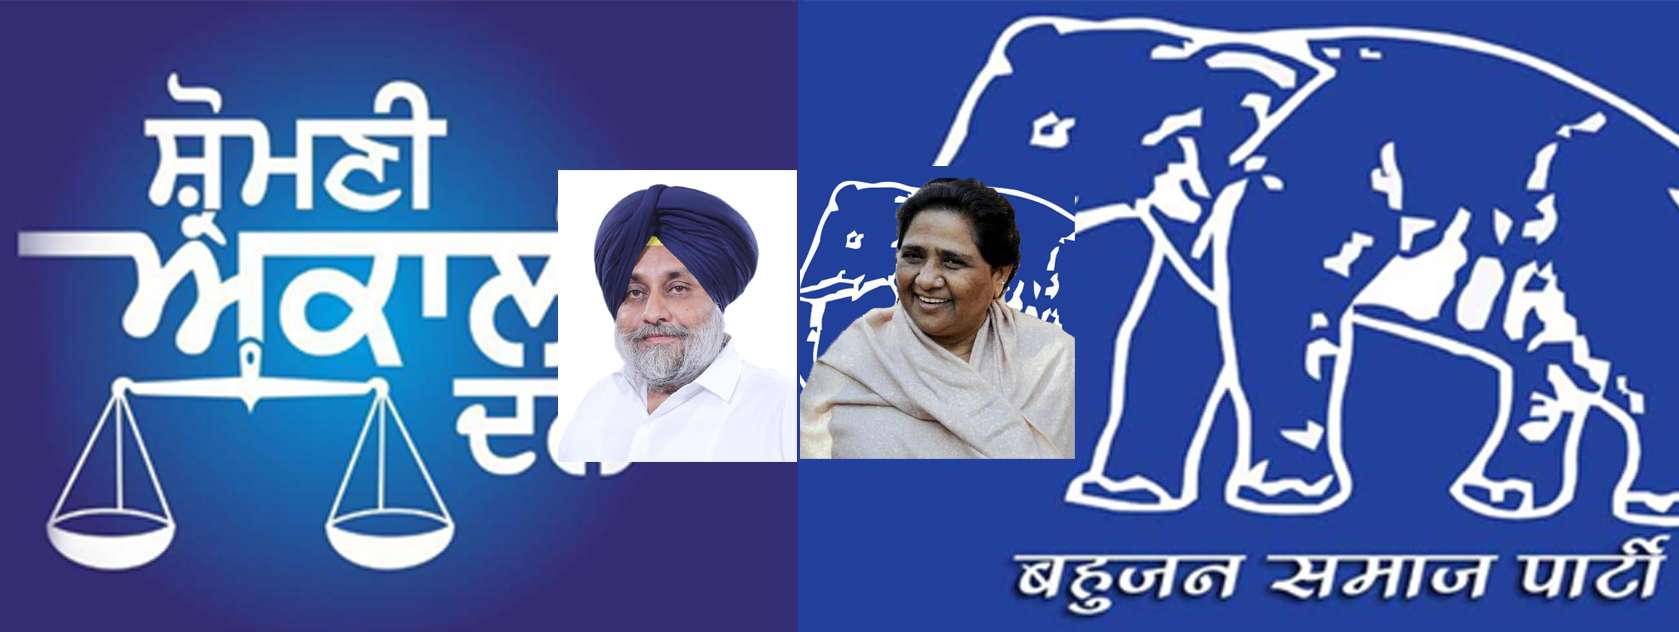 Then Two Seats Changed, Now SAD On Ludhiana North And Maholi Seats, BSP Will Fight On Raikot And Dinanagar